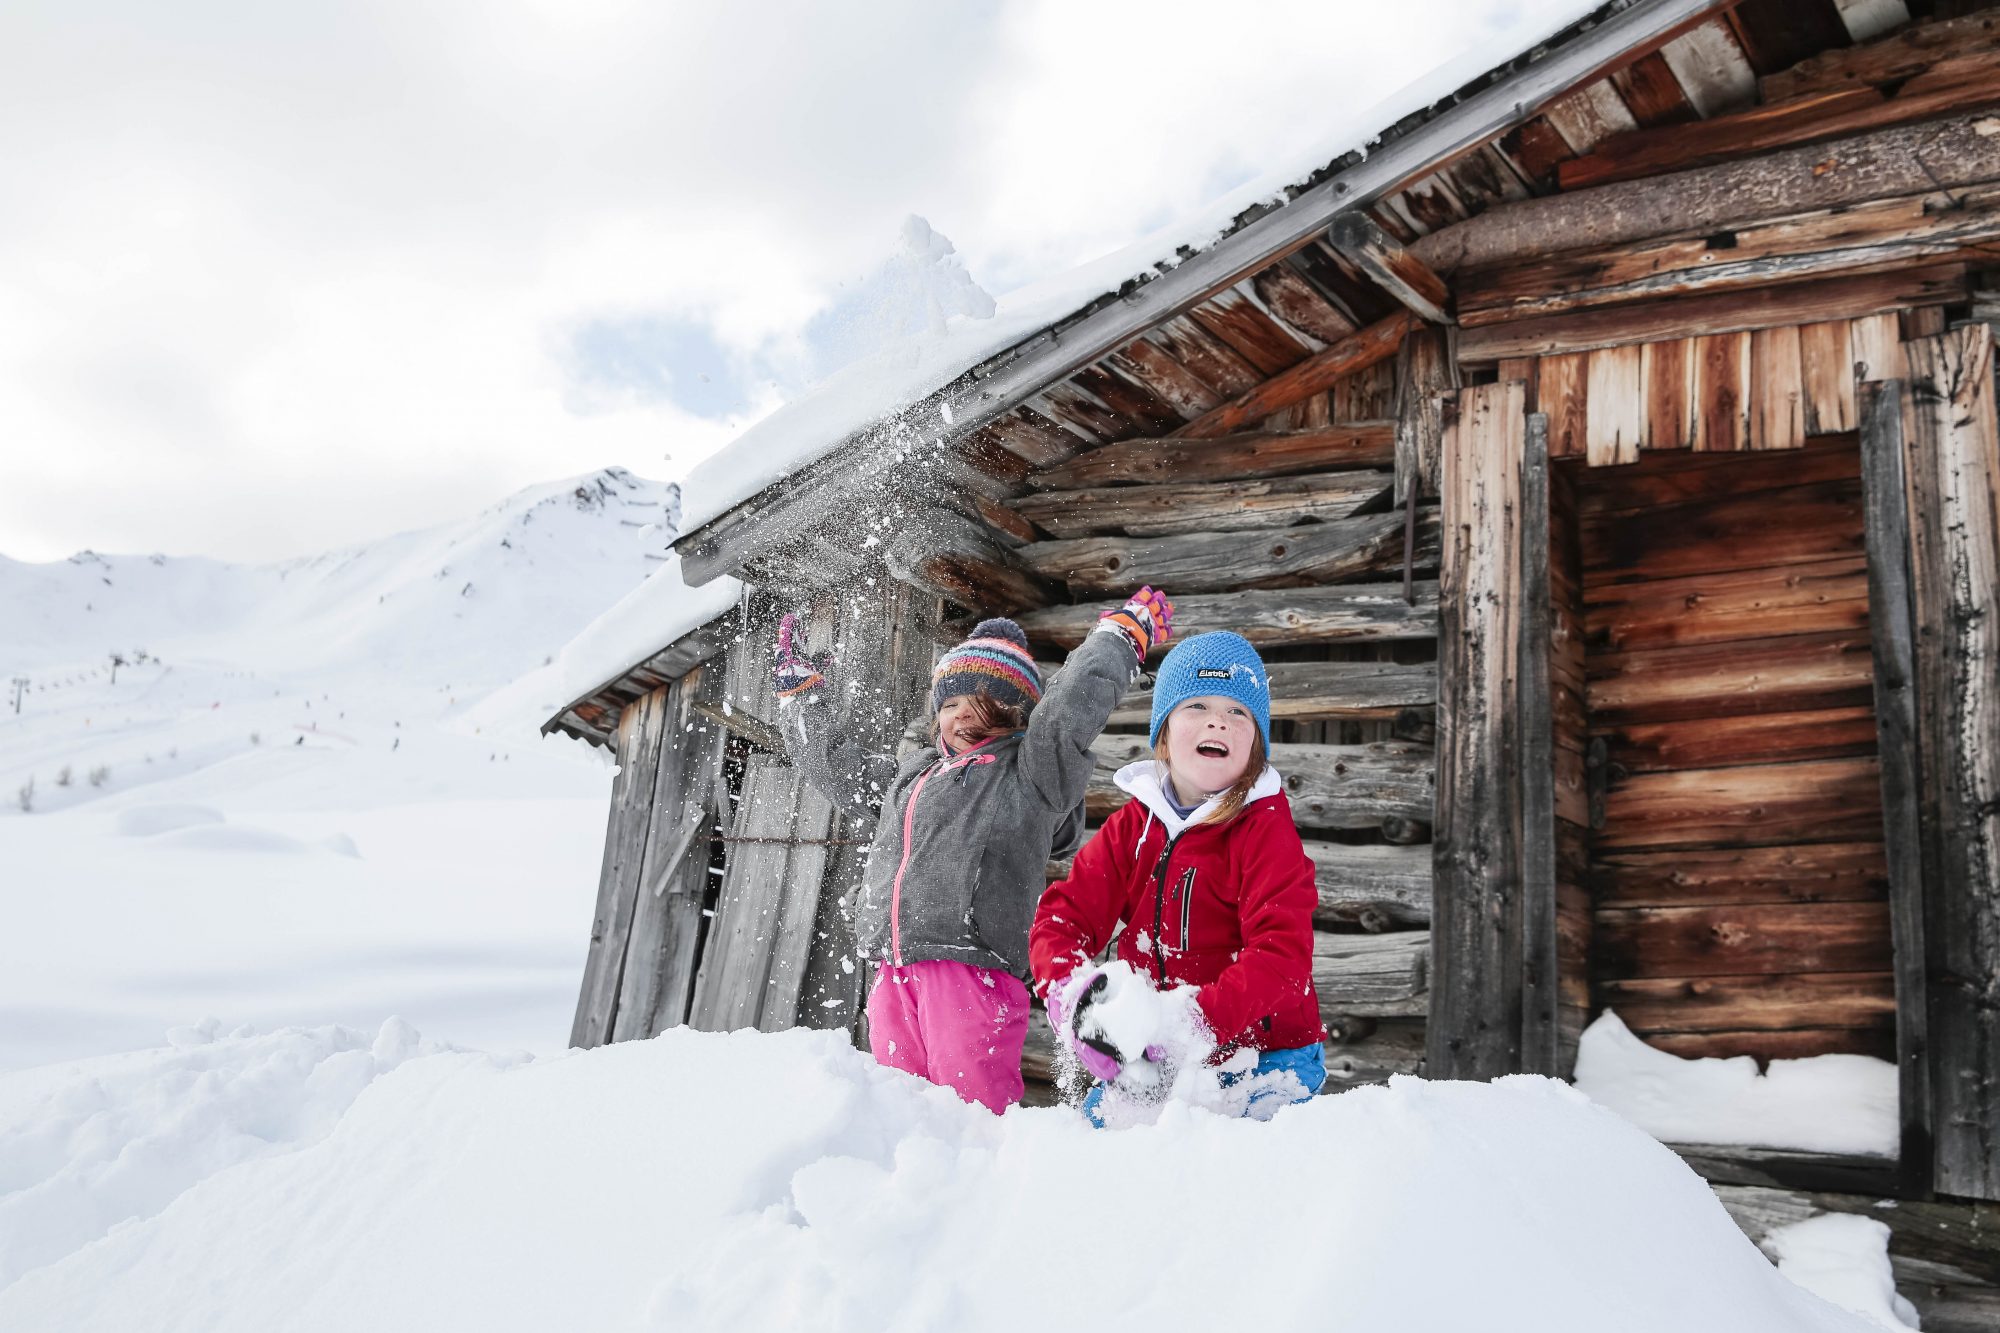 Experience the Snowy Fairytale World of Italy’s Val di Fassa 